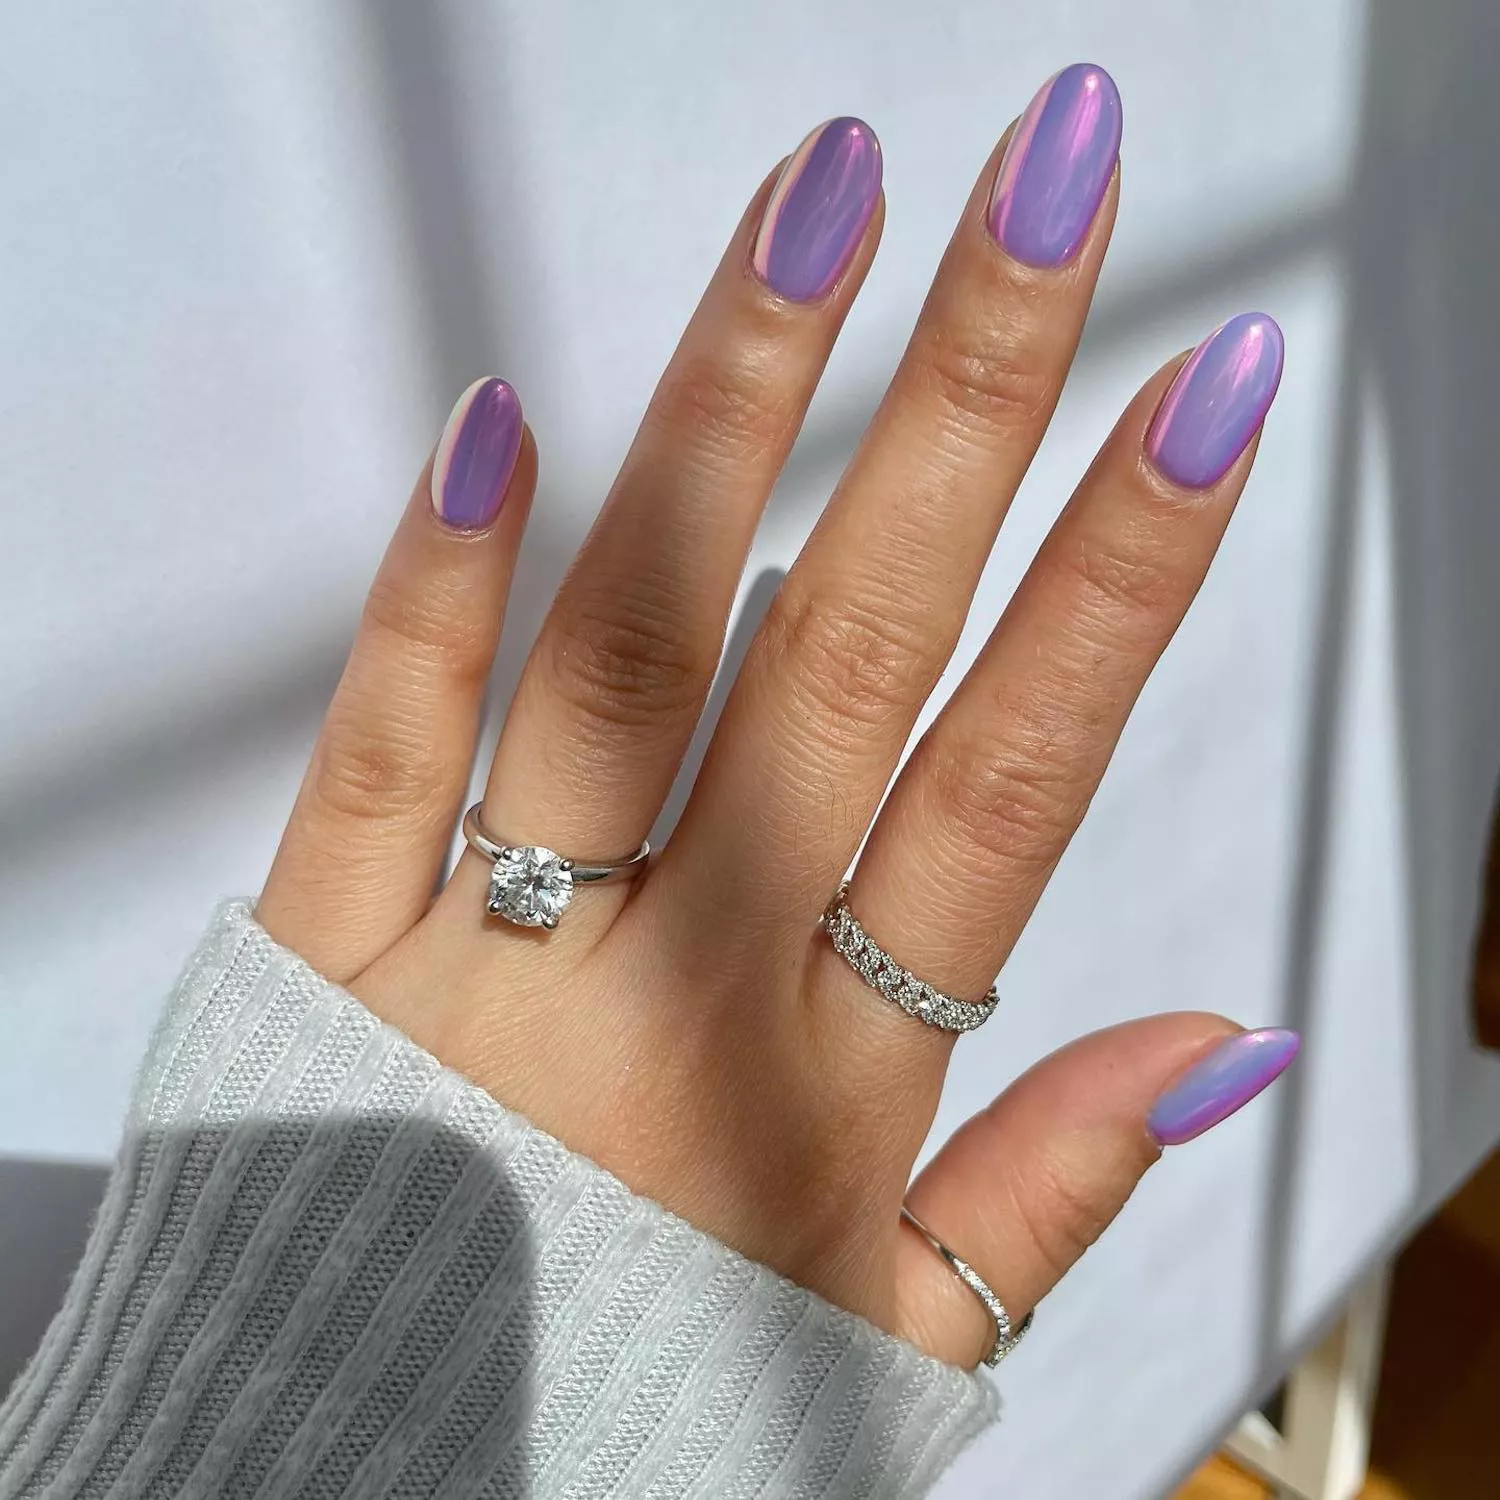 Lavender chrome manicure with hints of pink iridescence